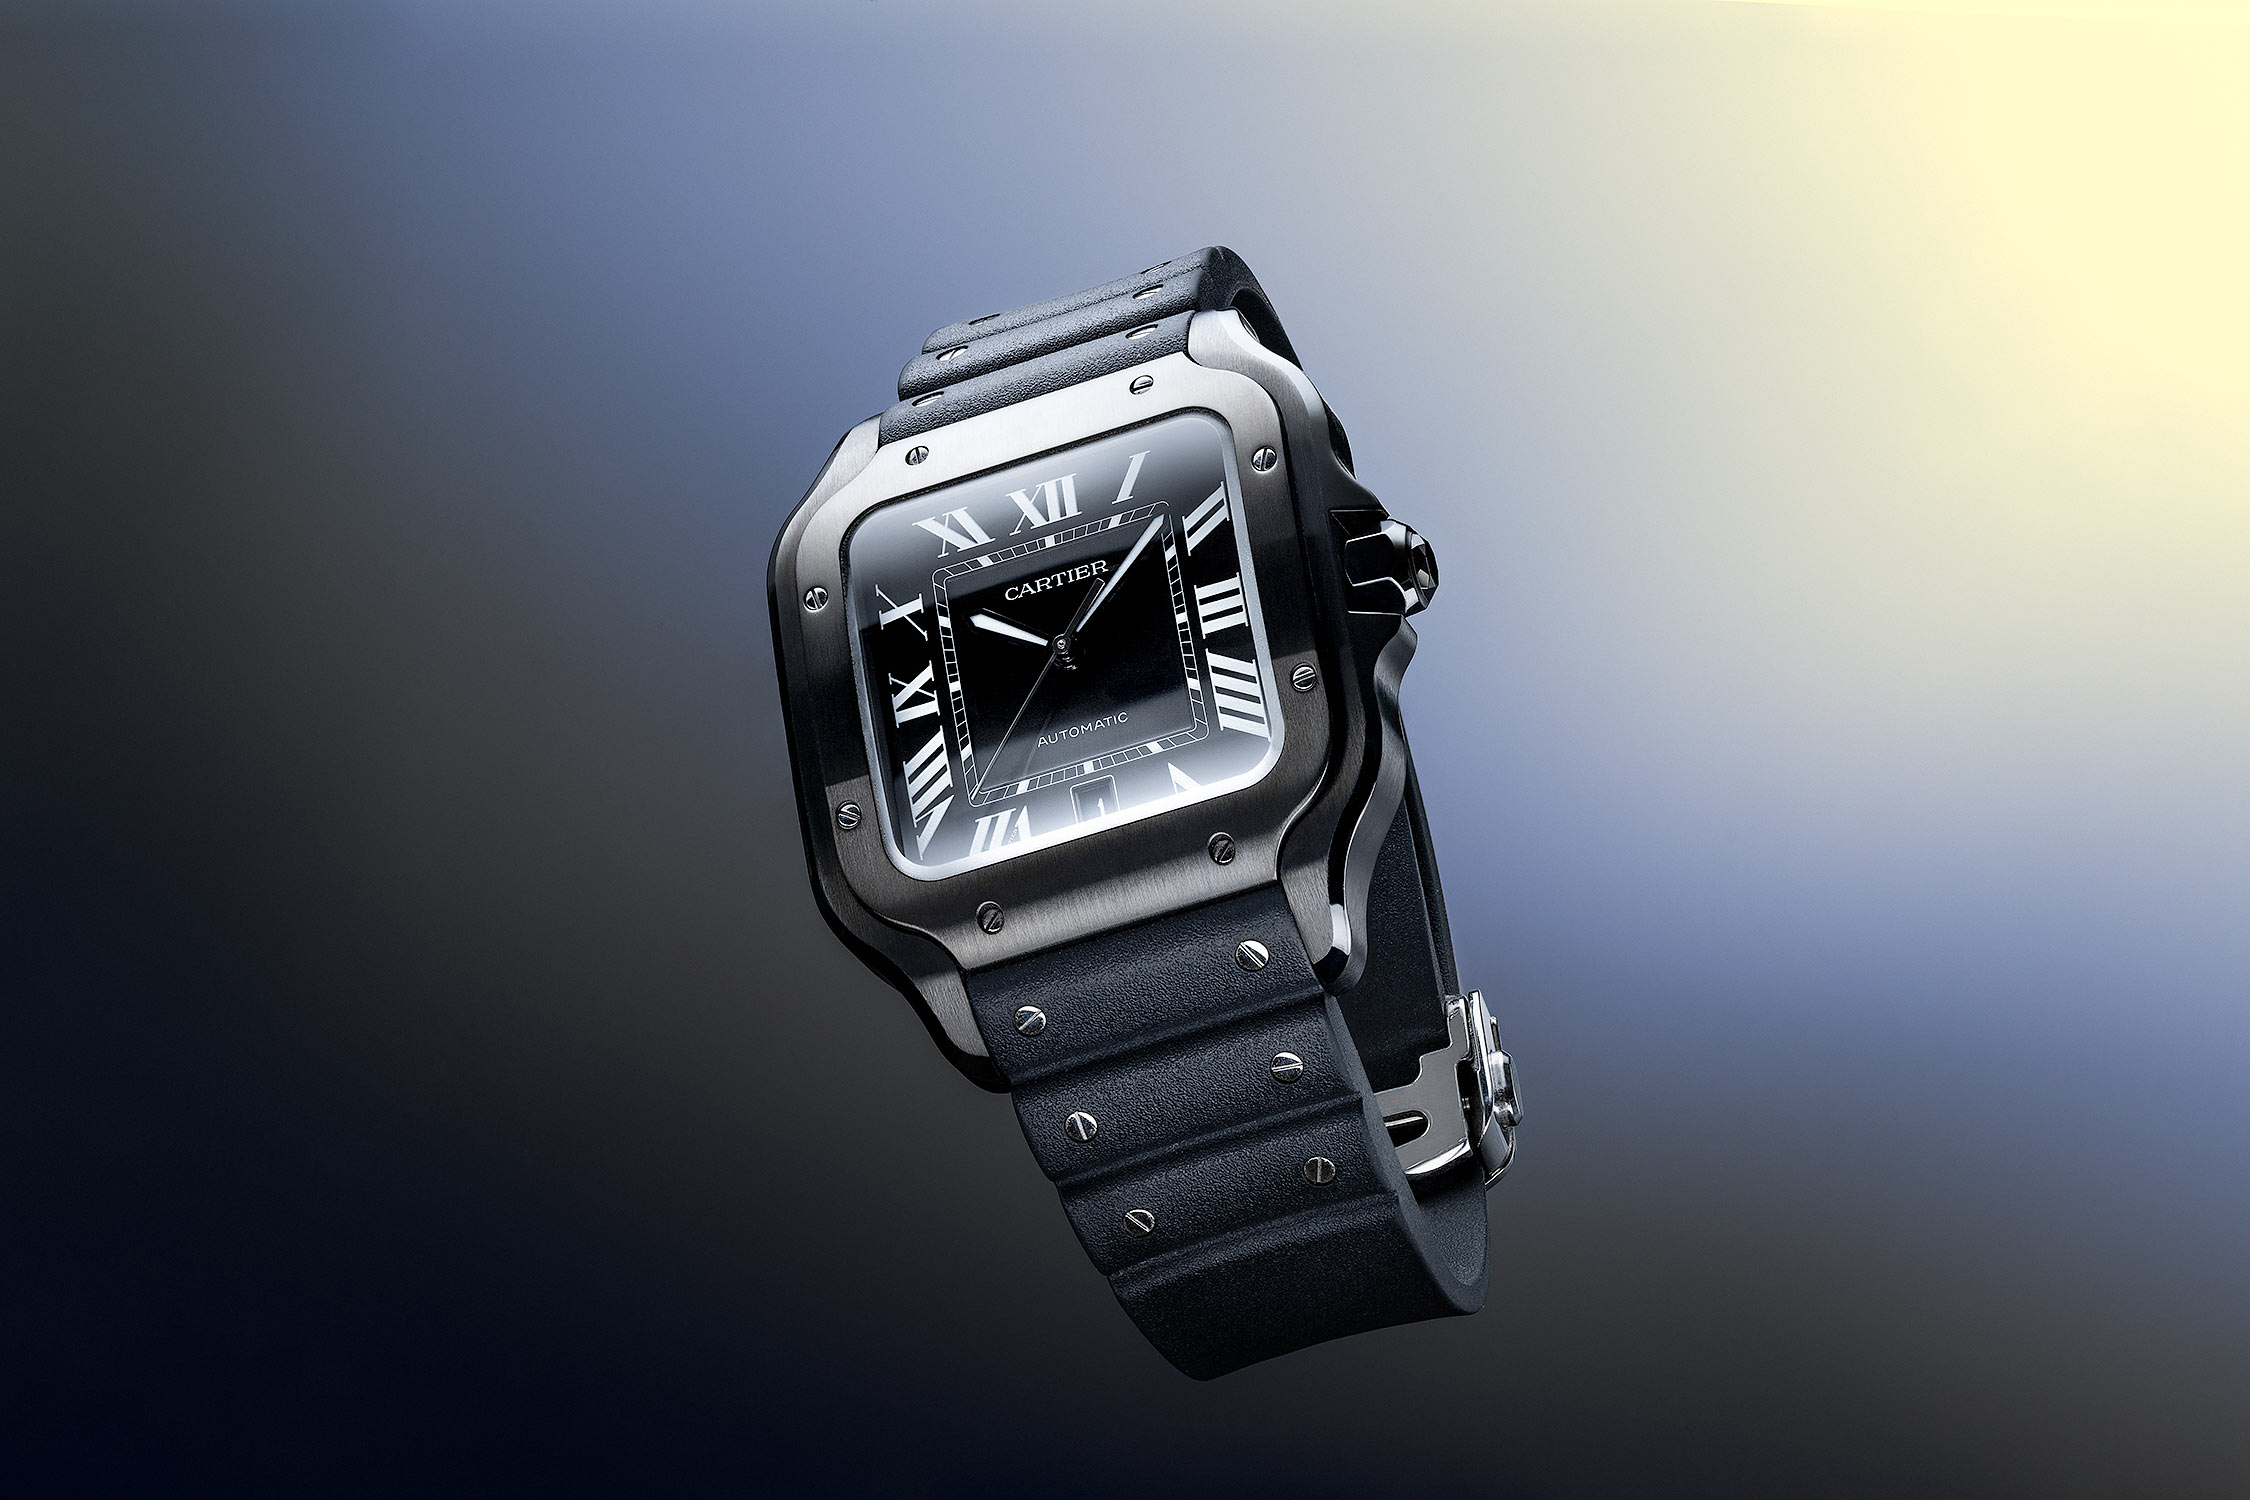 Catalogue advertising watch photography of a Cartier Santos ADLC against a gradient background.